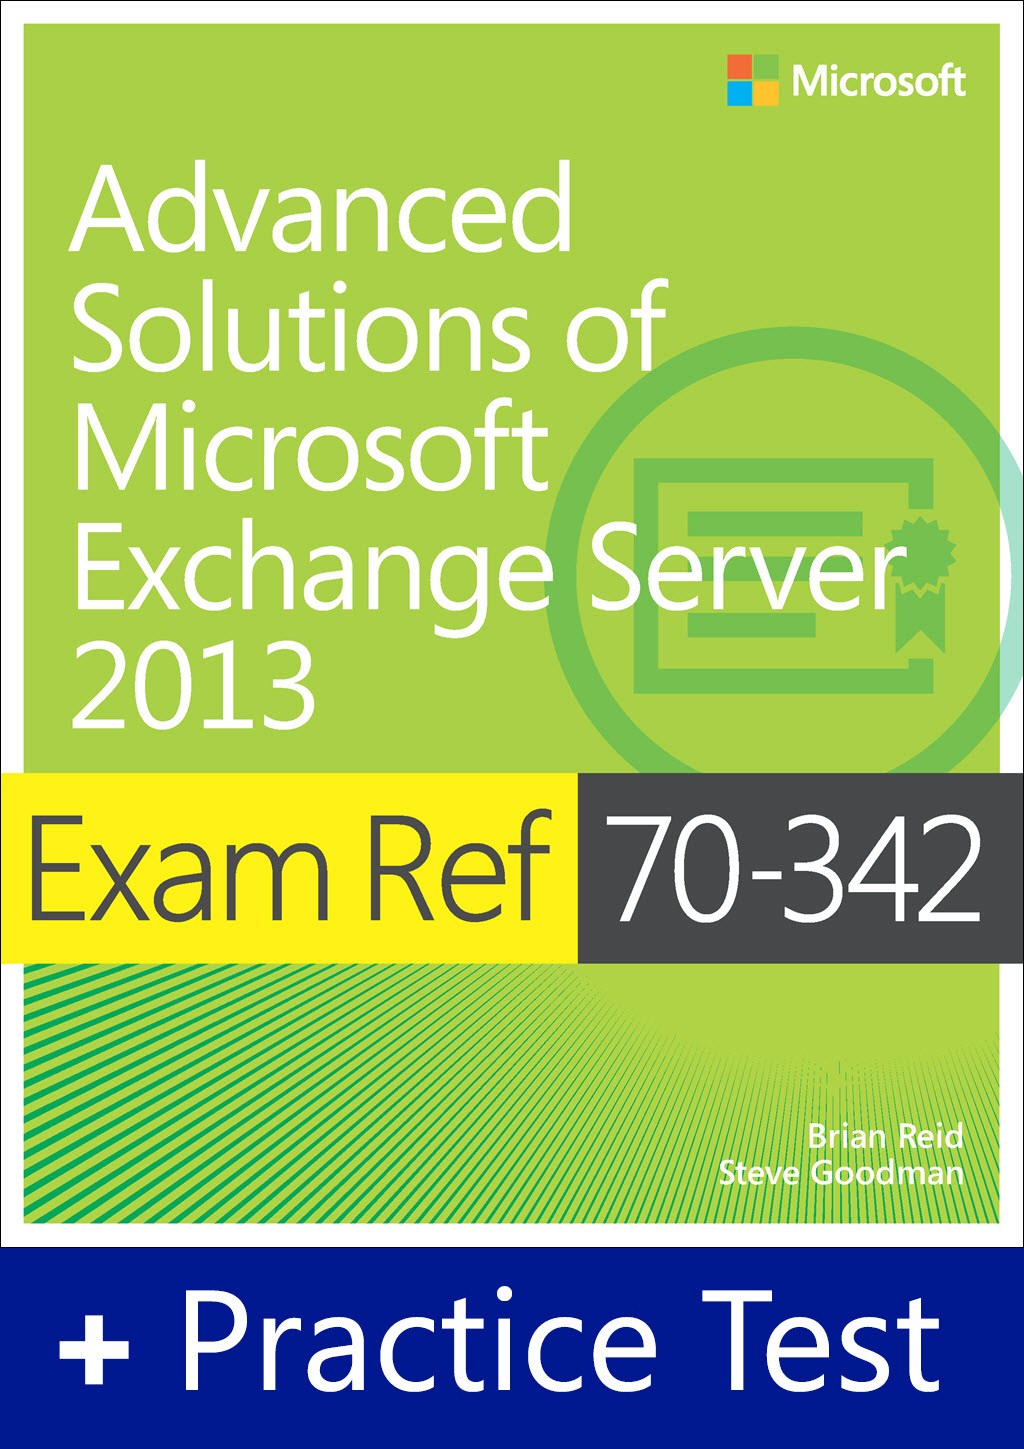 Exam Ref 70-342 Advanced Solutions of Microsoft Exchange Server 2013 with Practice Test